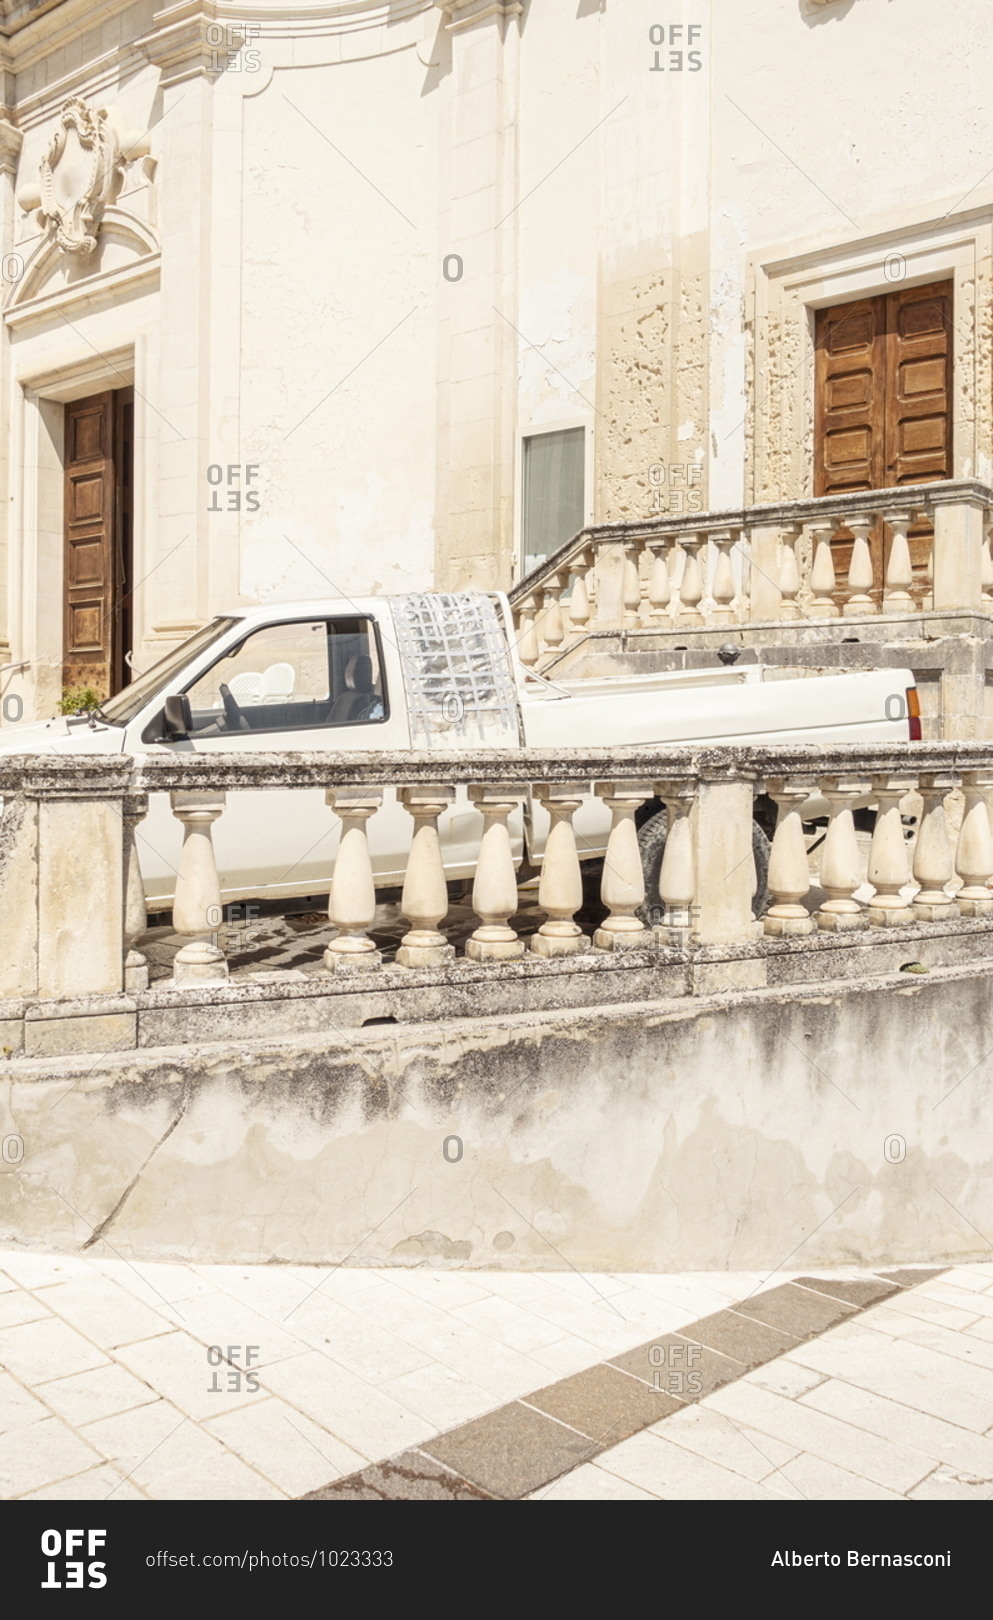 White truck parked by old building in Pennapiedimonte, Abruzzo, Italy